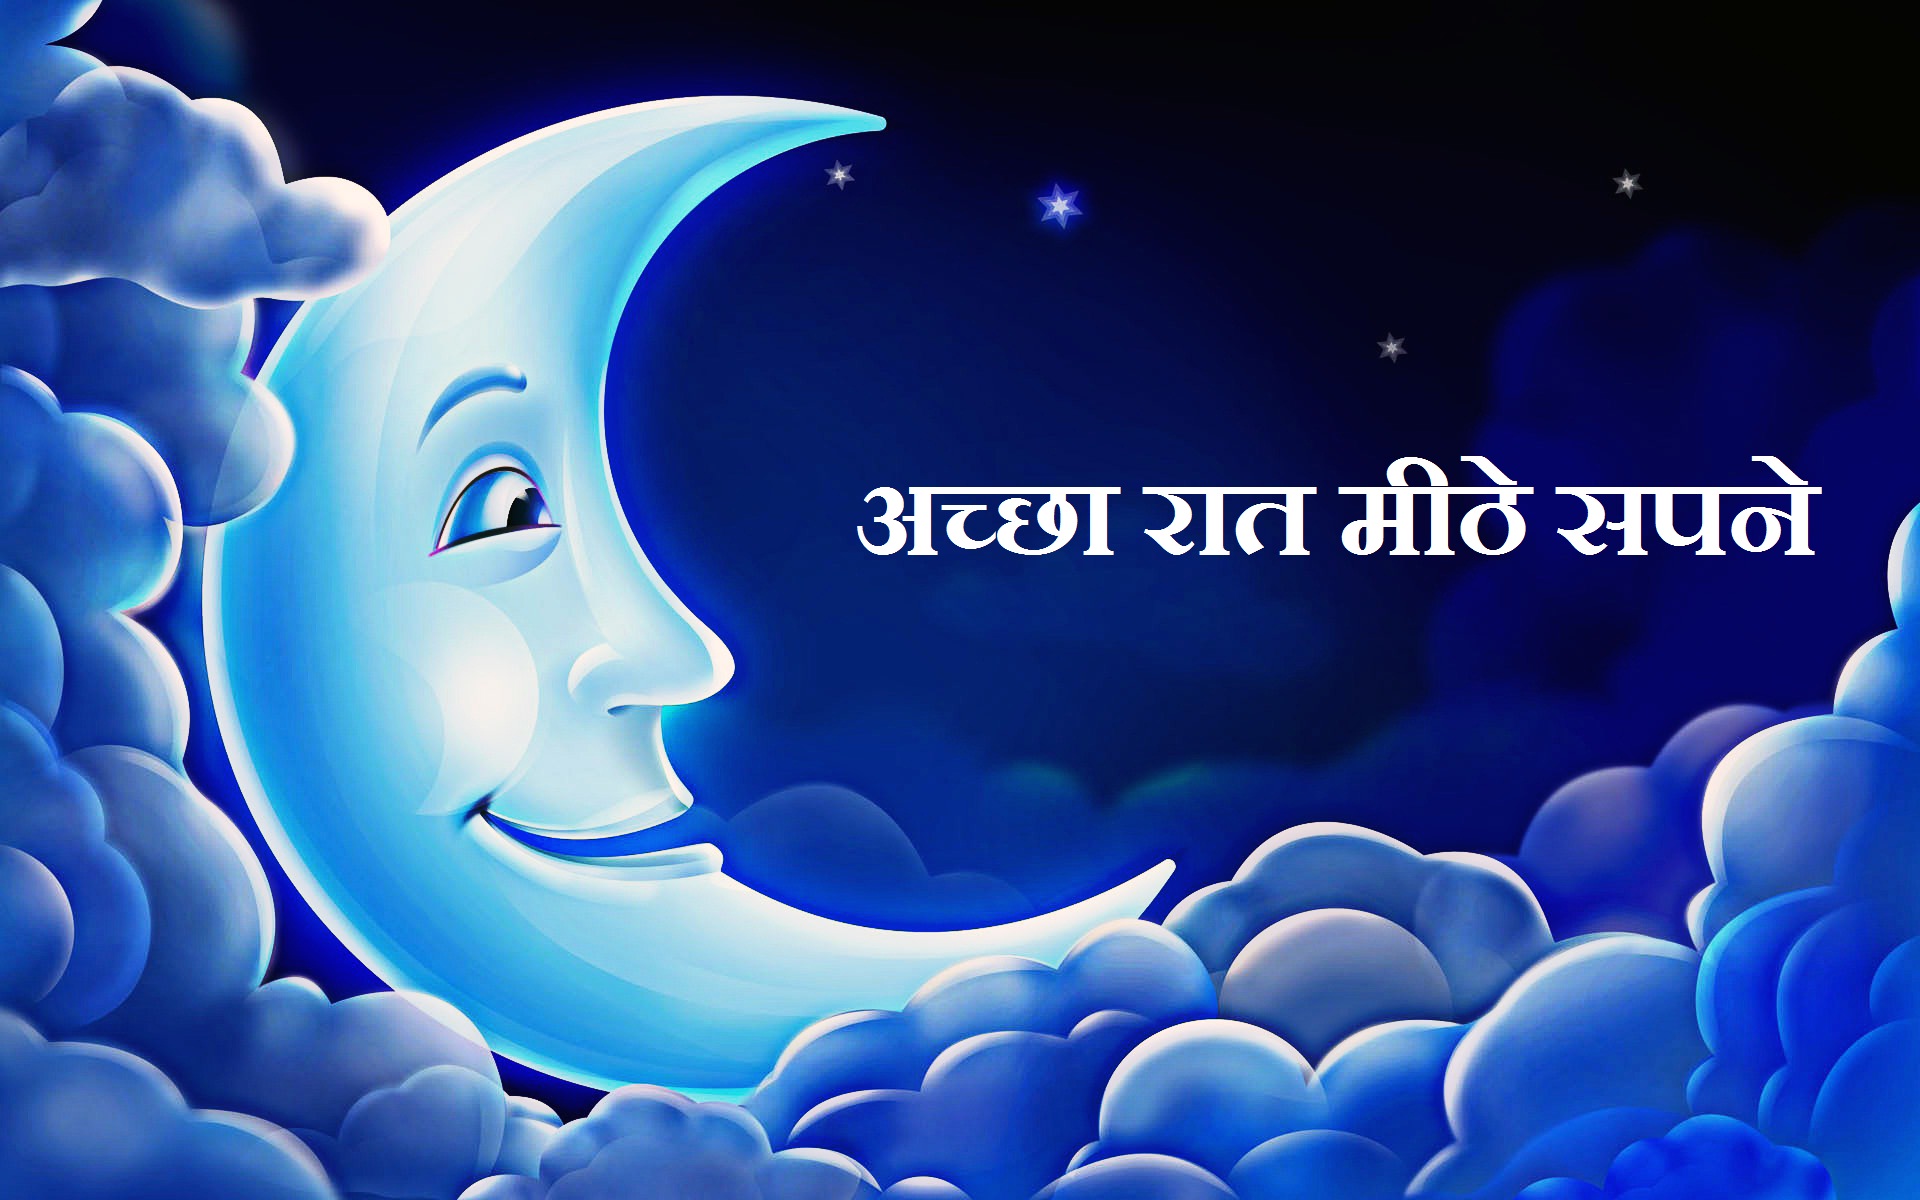 Best} Good Night Images For Whatsapp Free Download - Good Night Images  Animated - 1920x1200 Wallpaper 